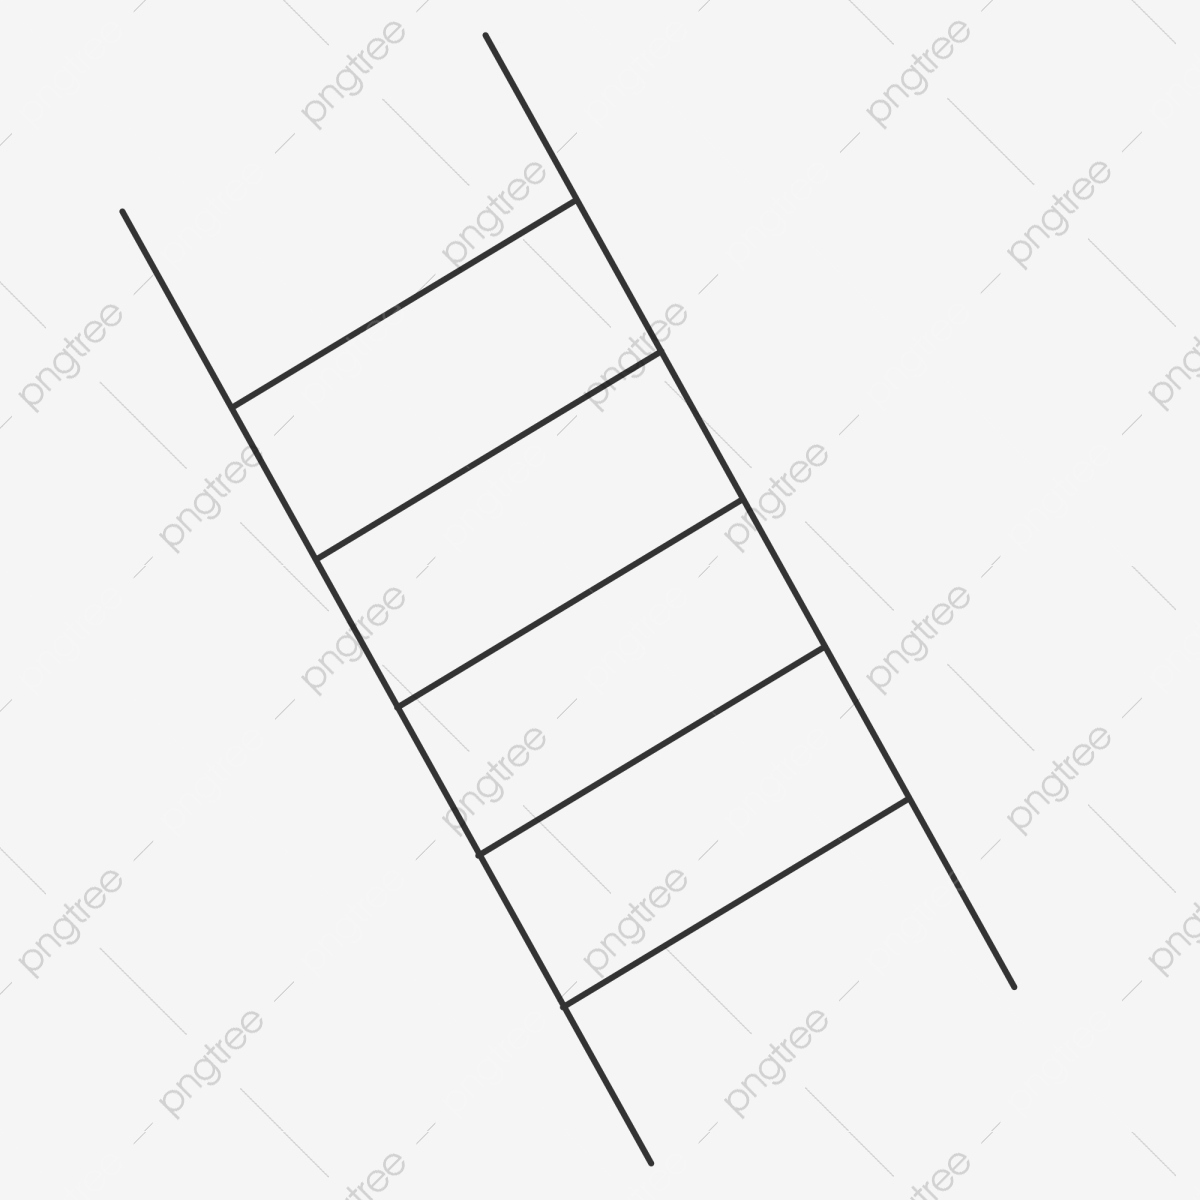 ladder clipart simple